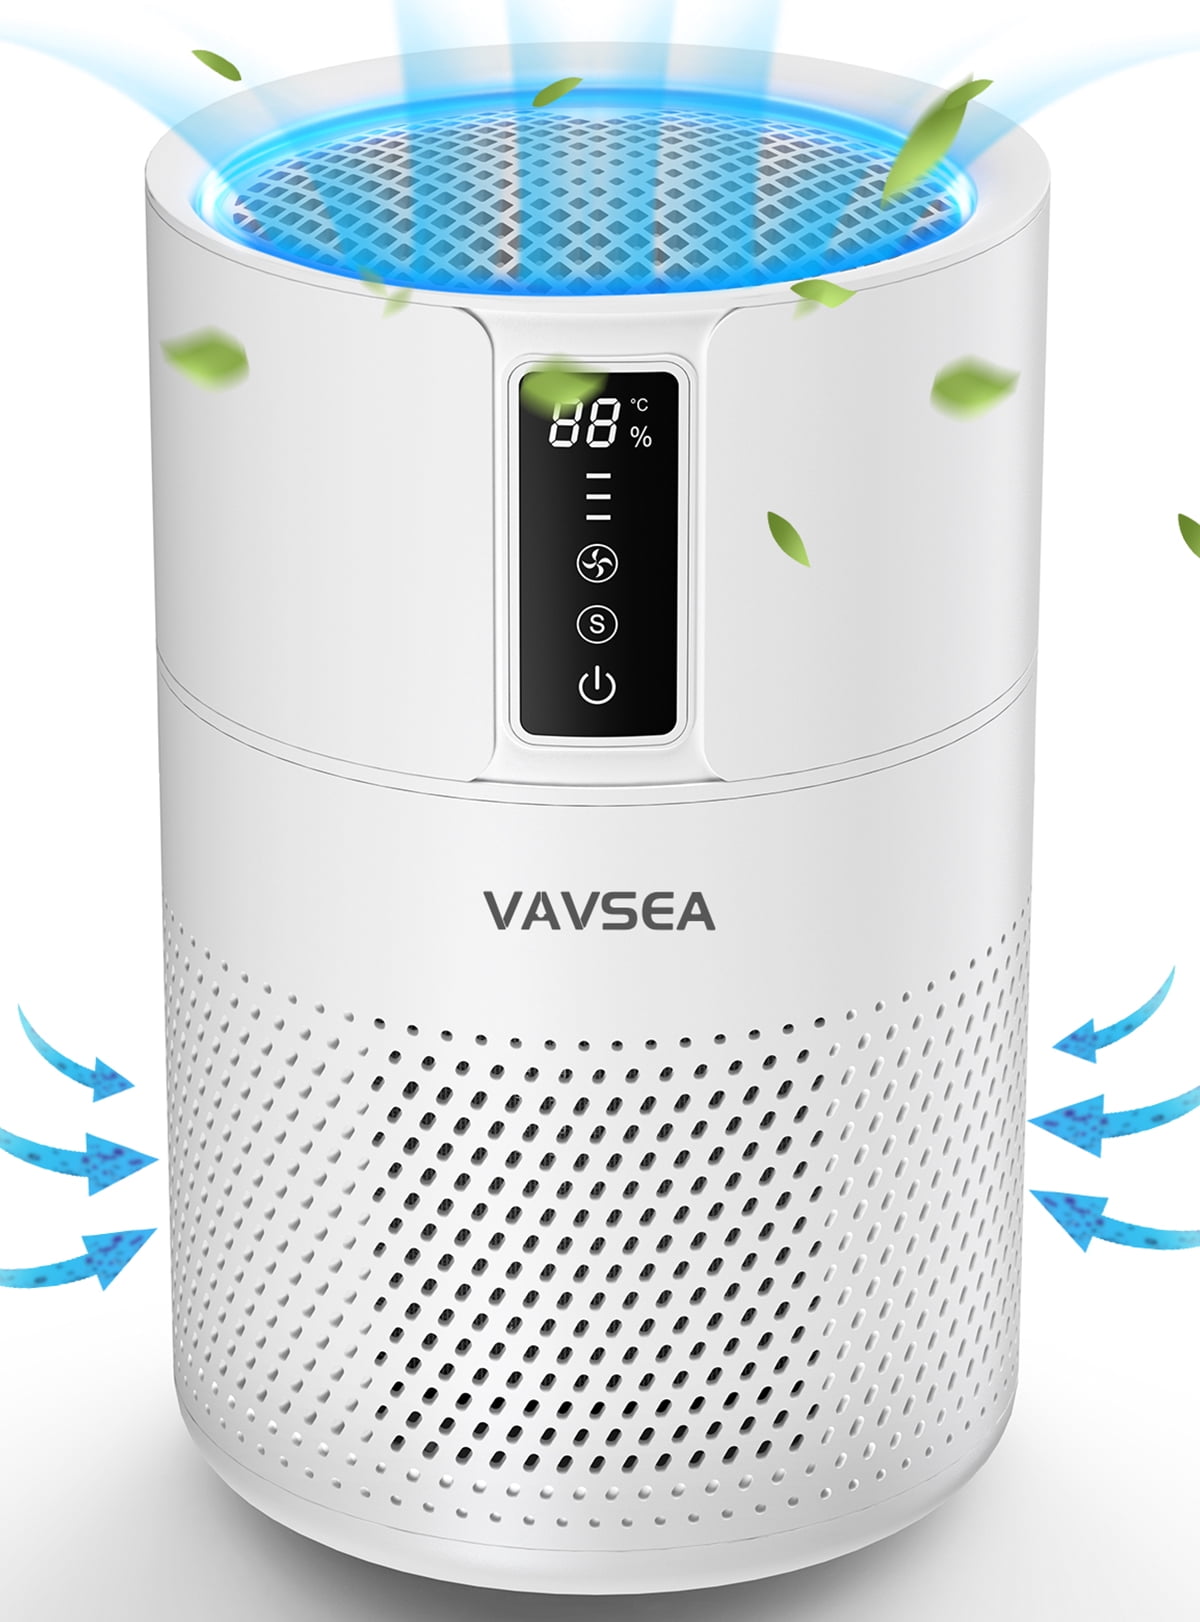 VAVSEA Air Purifier, HEPA Air Filter for Home Large Room up to 600 Sqft, Air Cleaner for Pet Hair, Allergies, 99.97% Smokers, Odors, Dust, Pollen, Odor Eliminators for Bedroom